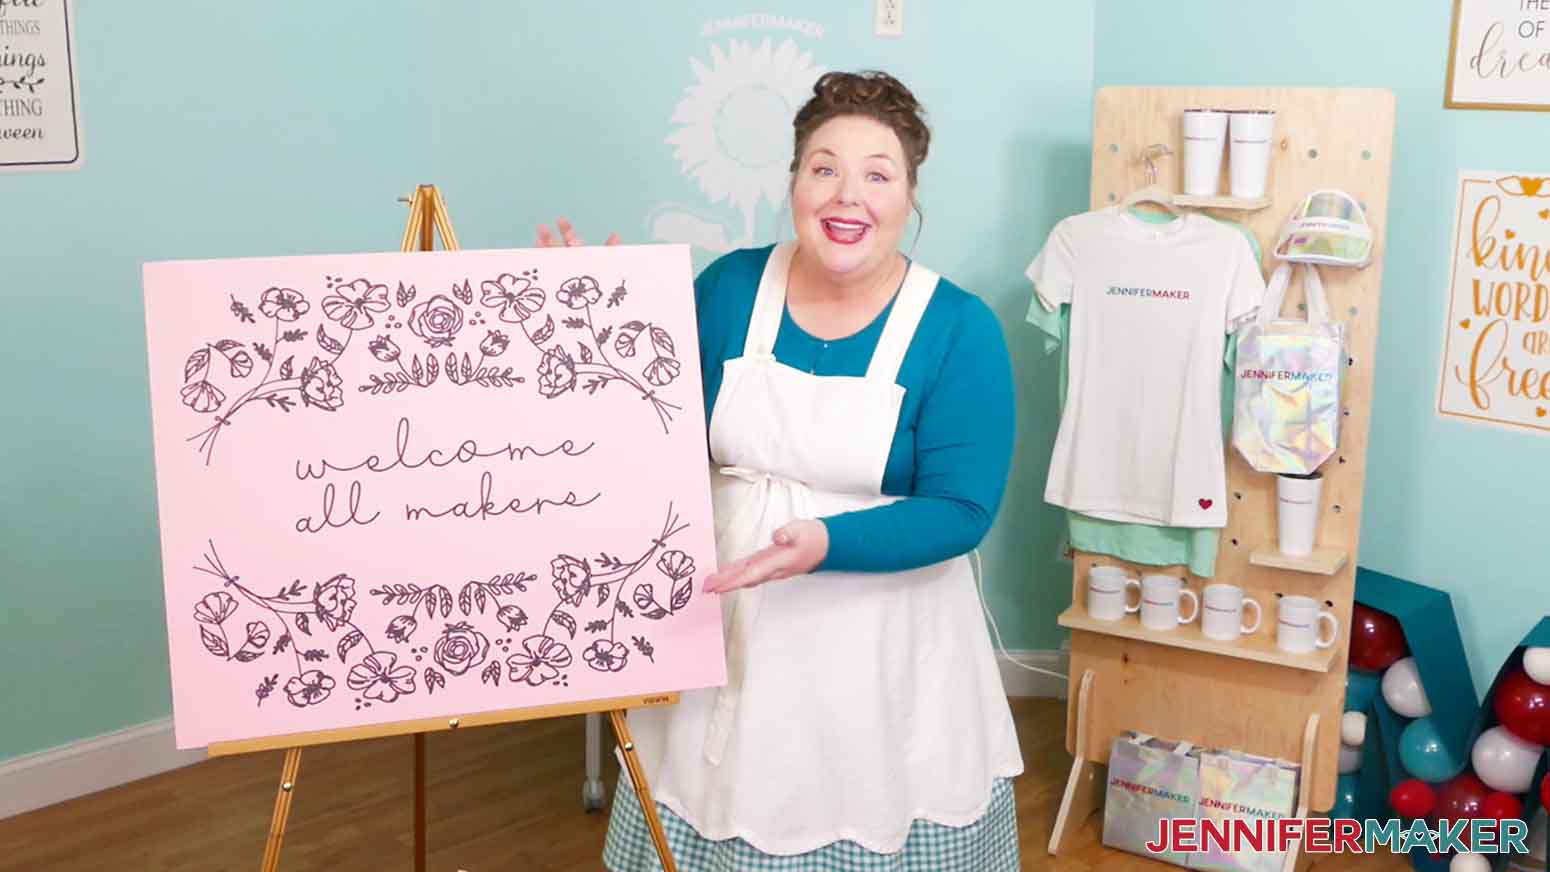 Jennifer Maker with a 24" x 28" pink cardstock sign that reads "Welcome Makers" drawn using the Cricut large format cutting machine.